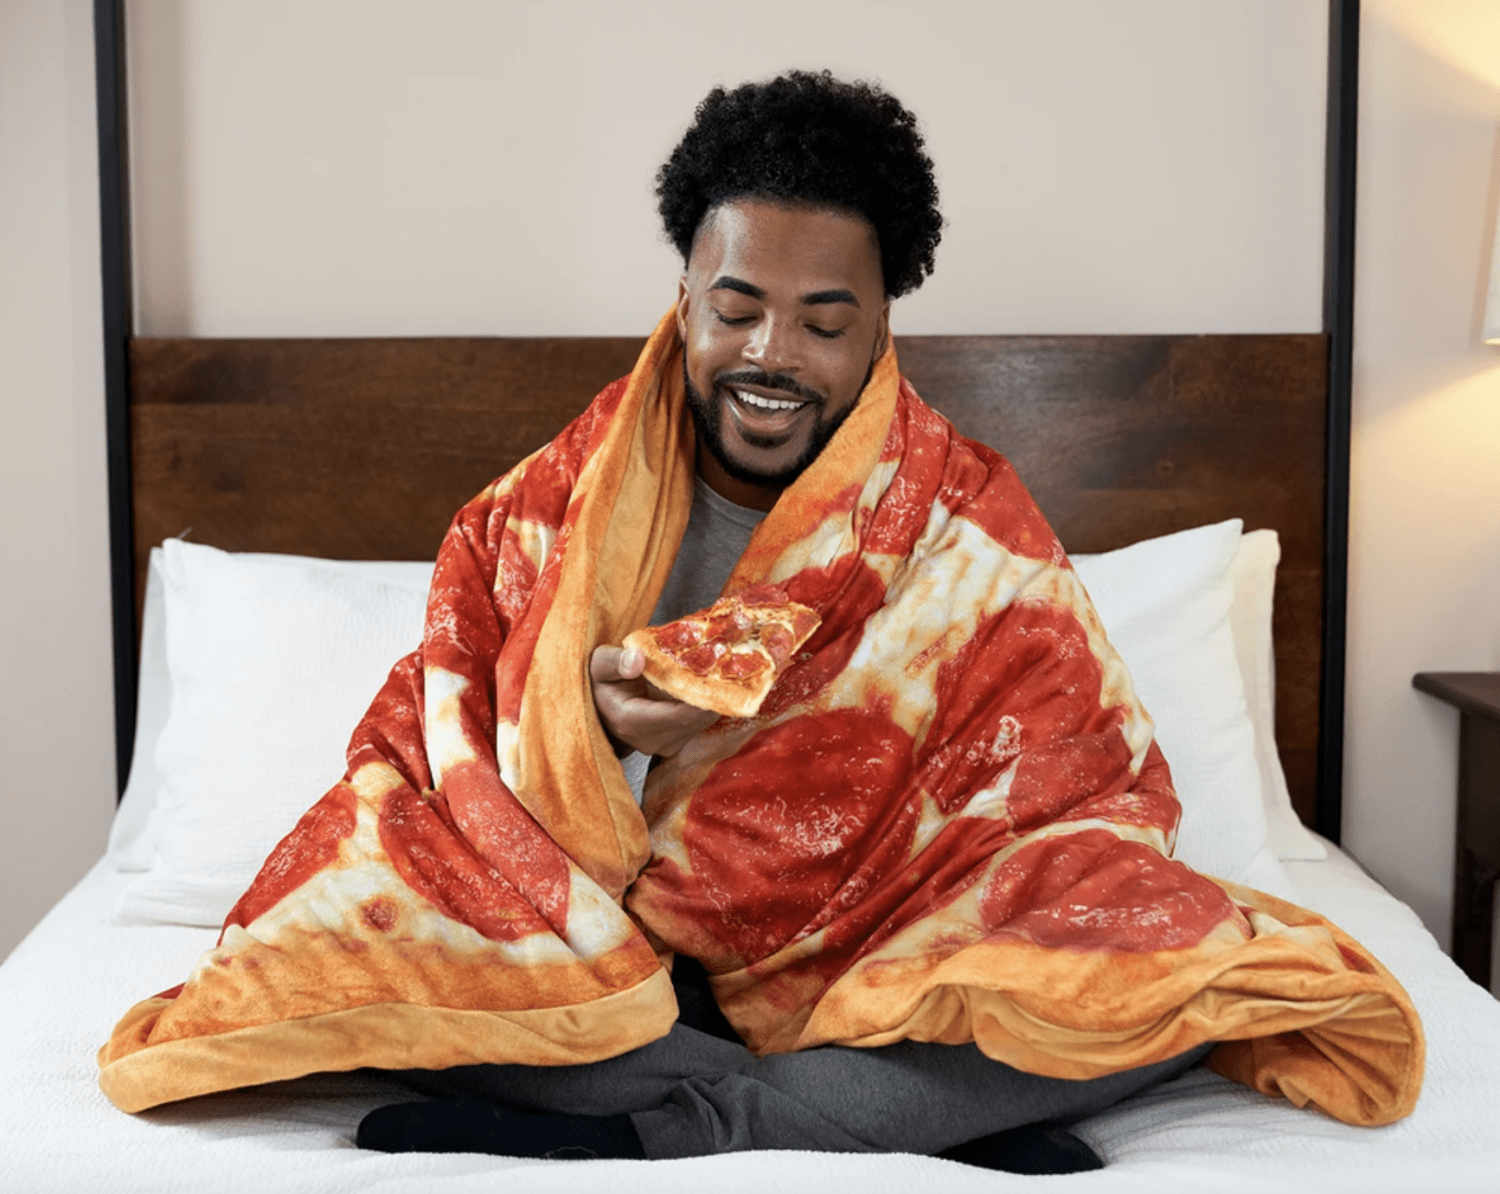 Pizza Hut is selling a weighted blanket with Gravity—here's where